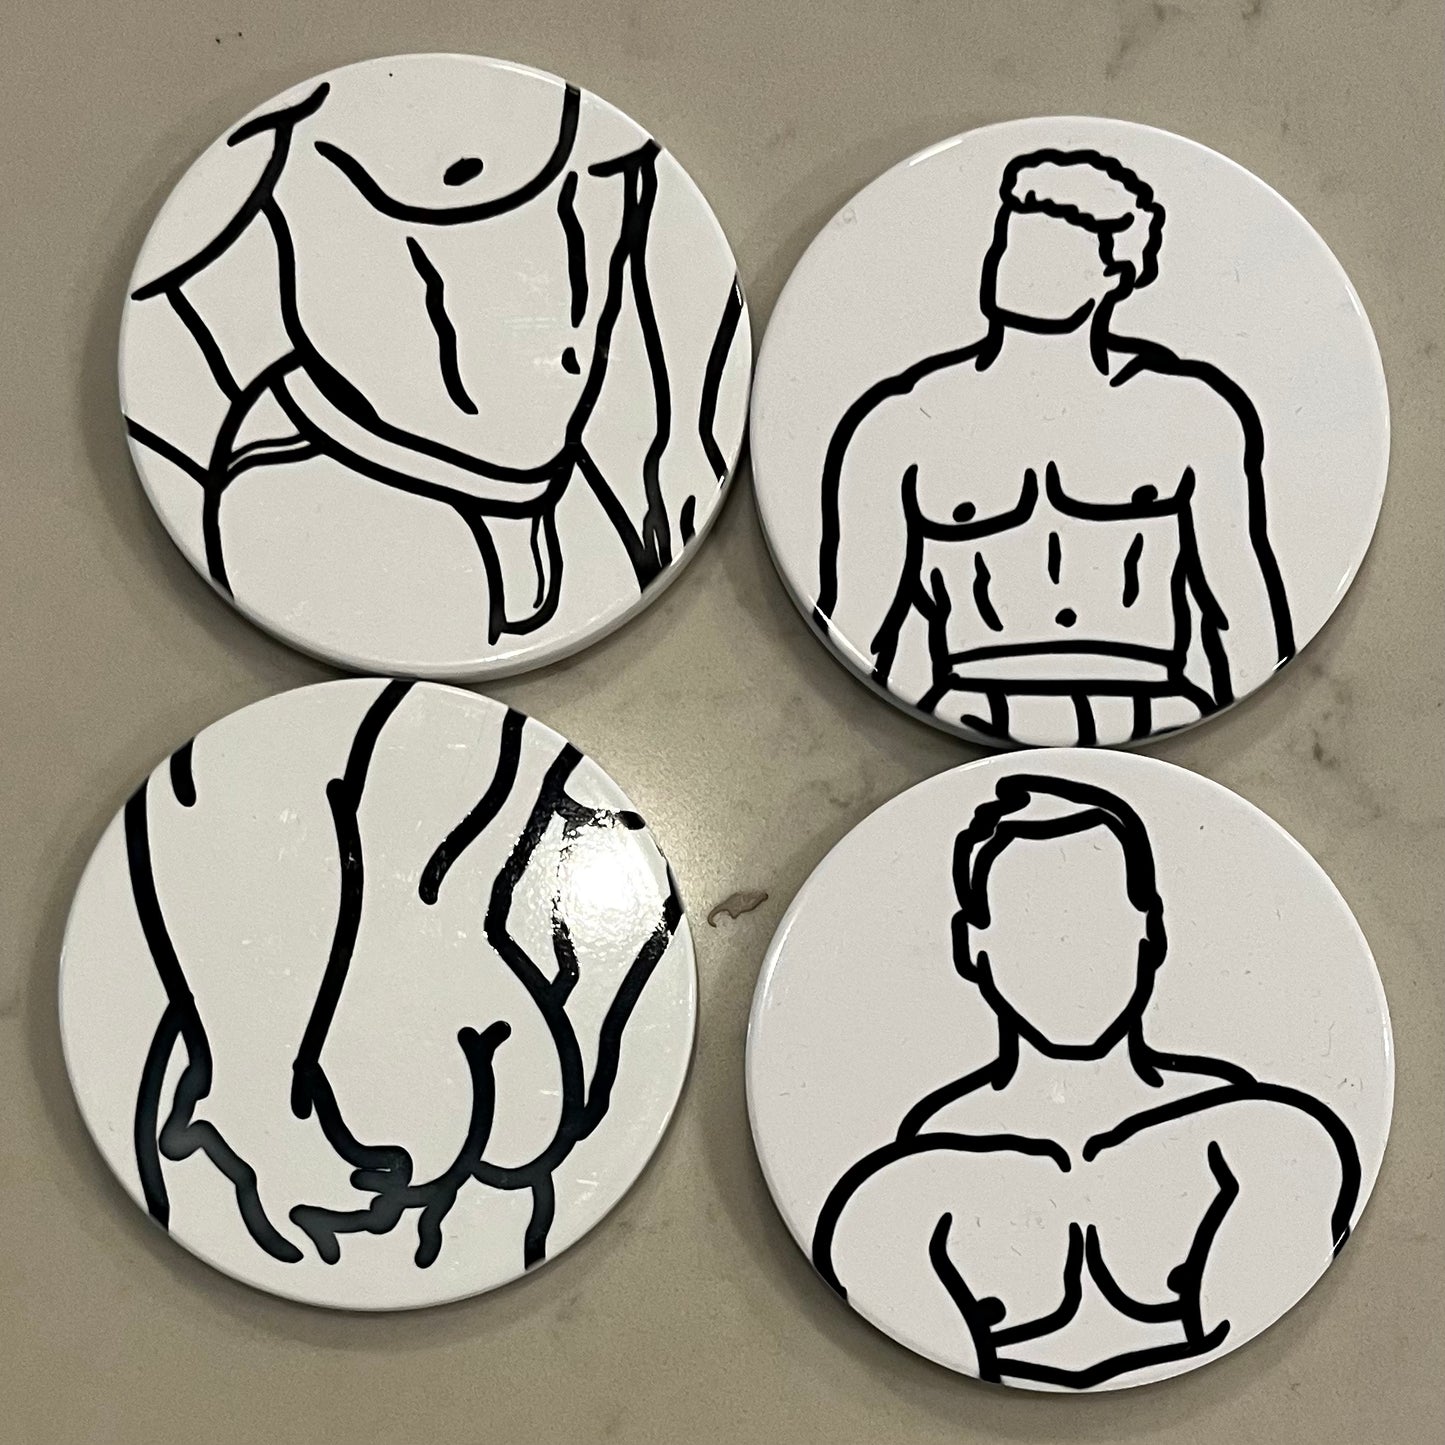 Imperfect Coasters - Sets of 4